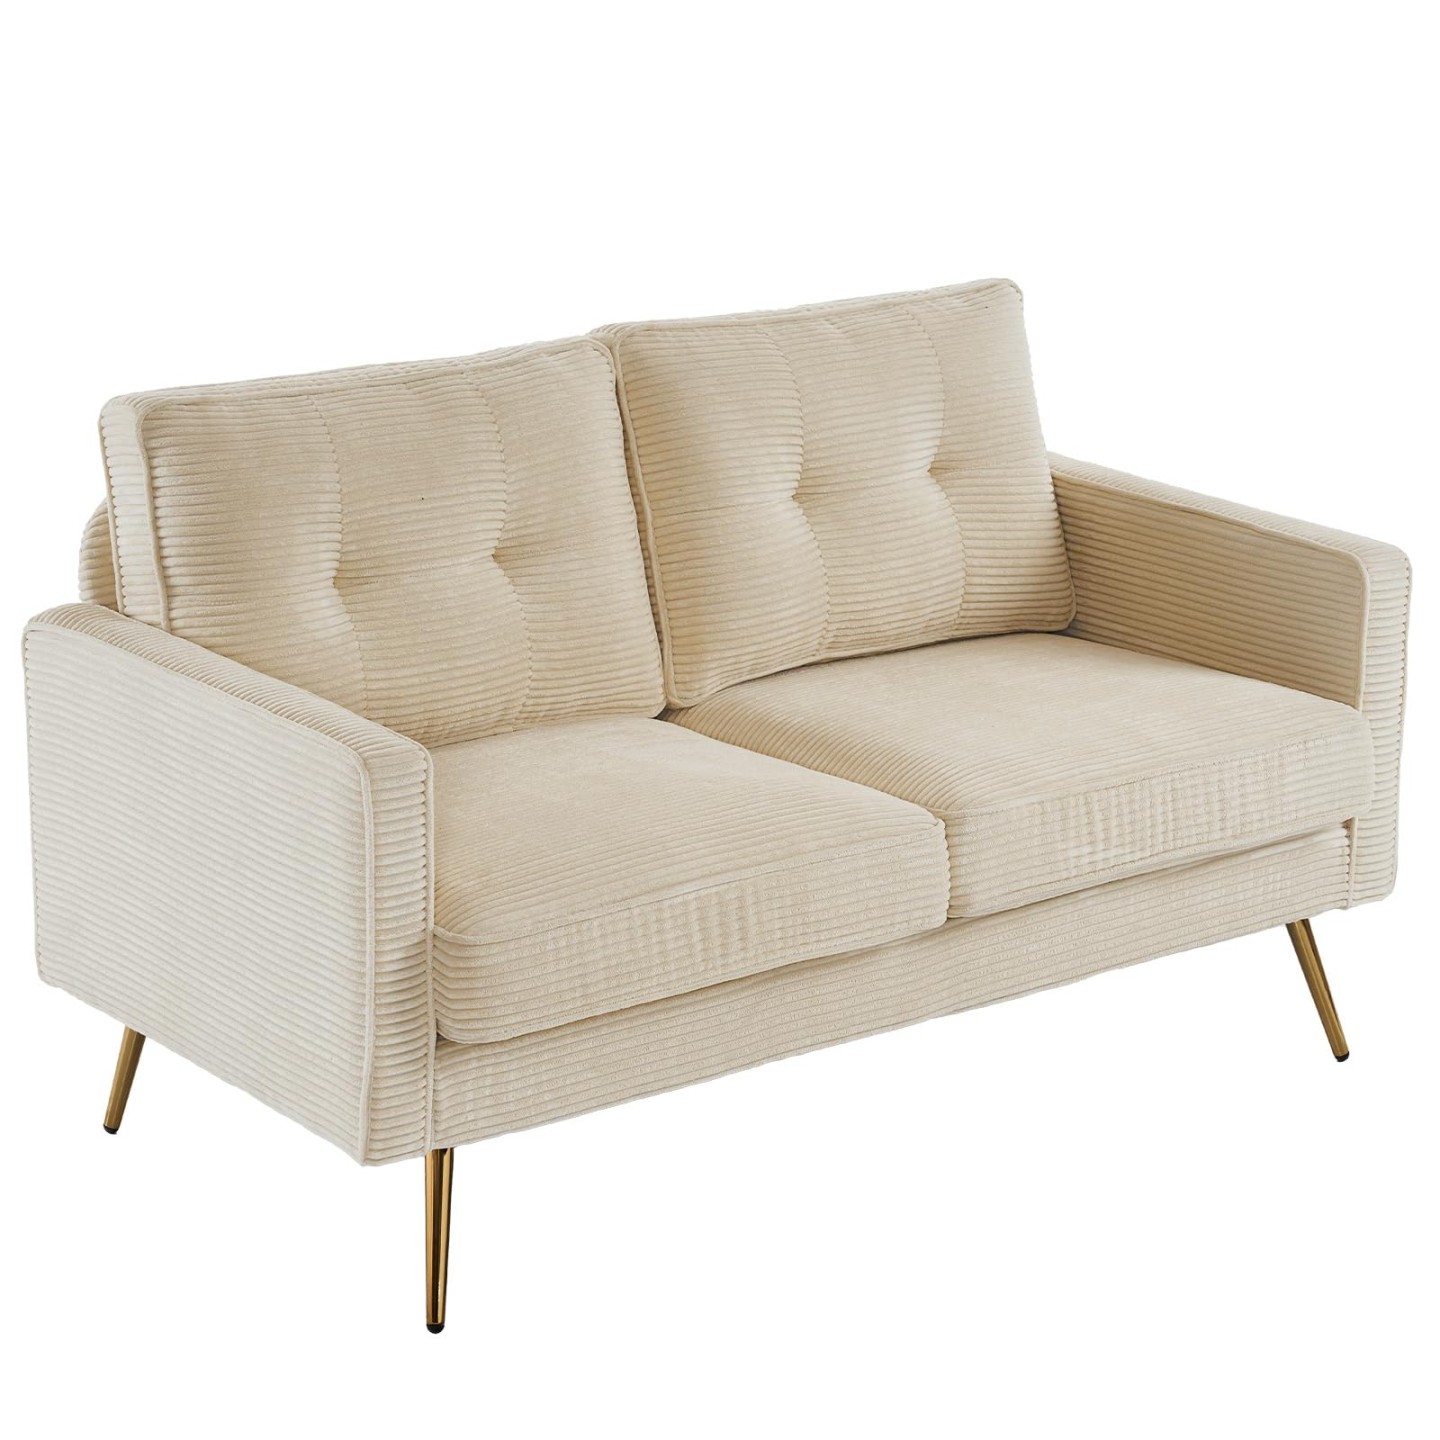 VINGLI " Modern Beige Loveseat,Small Corduroy Sofa Couch Deep Seat for  Living Room,-Seater Loveseat Sofa for Bedroom,Apartment,Office,Dorm,Small